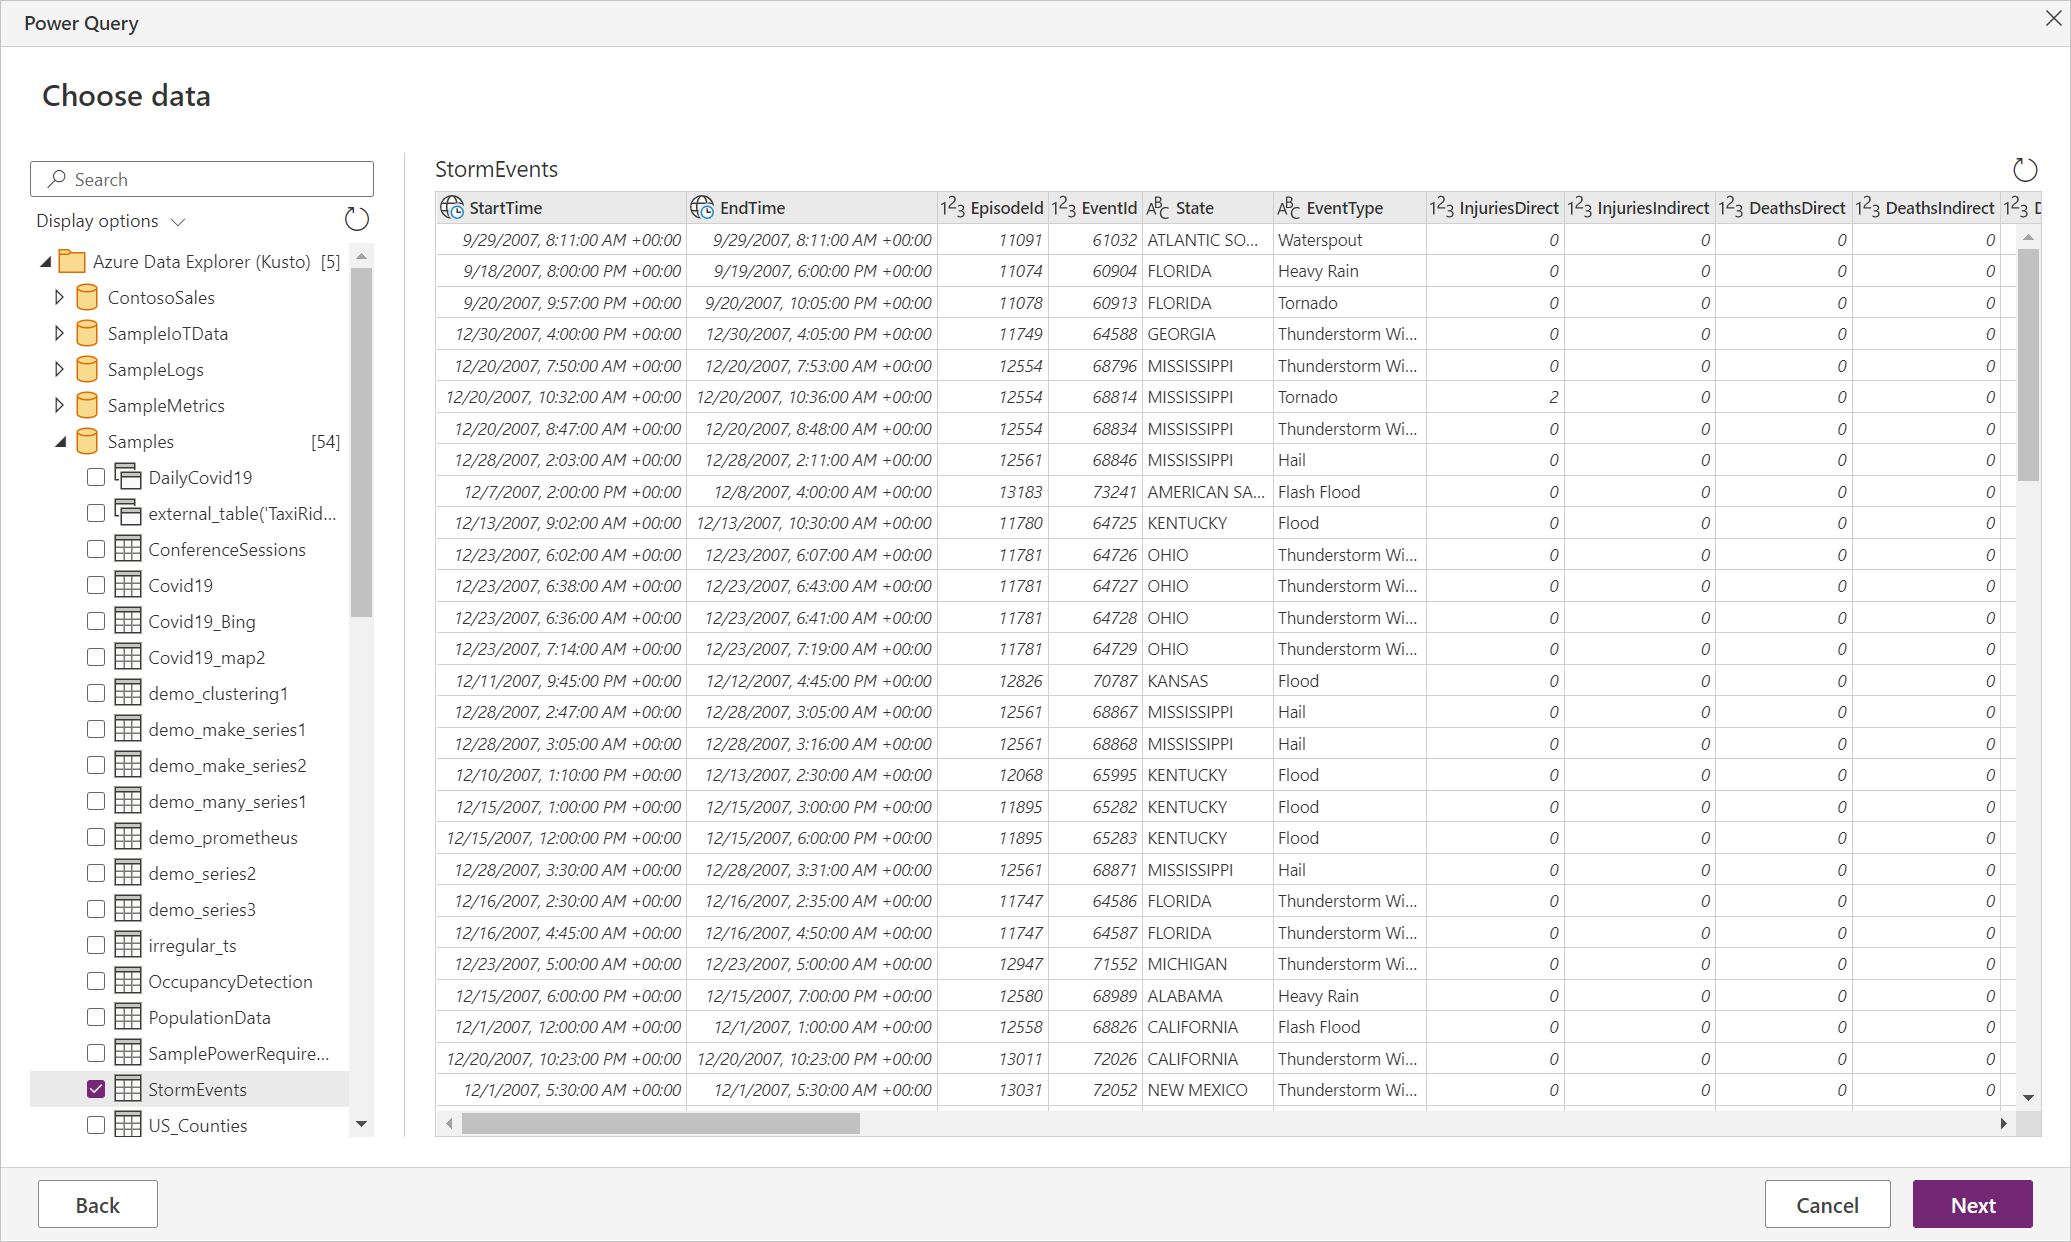 Screenshot of the Choose data page, containing the data from StormEvents in the Samples database.